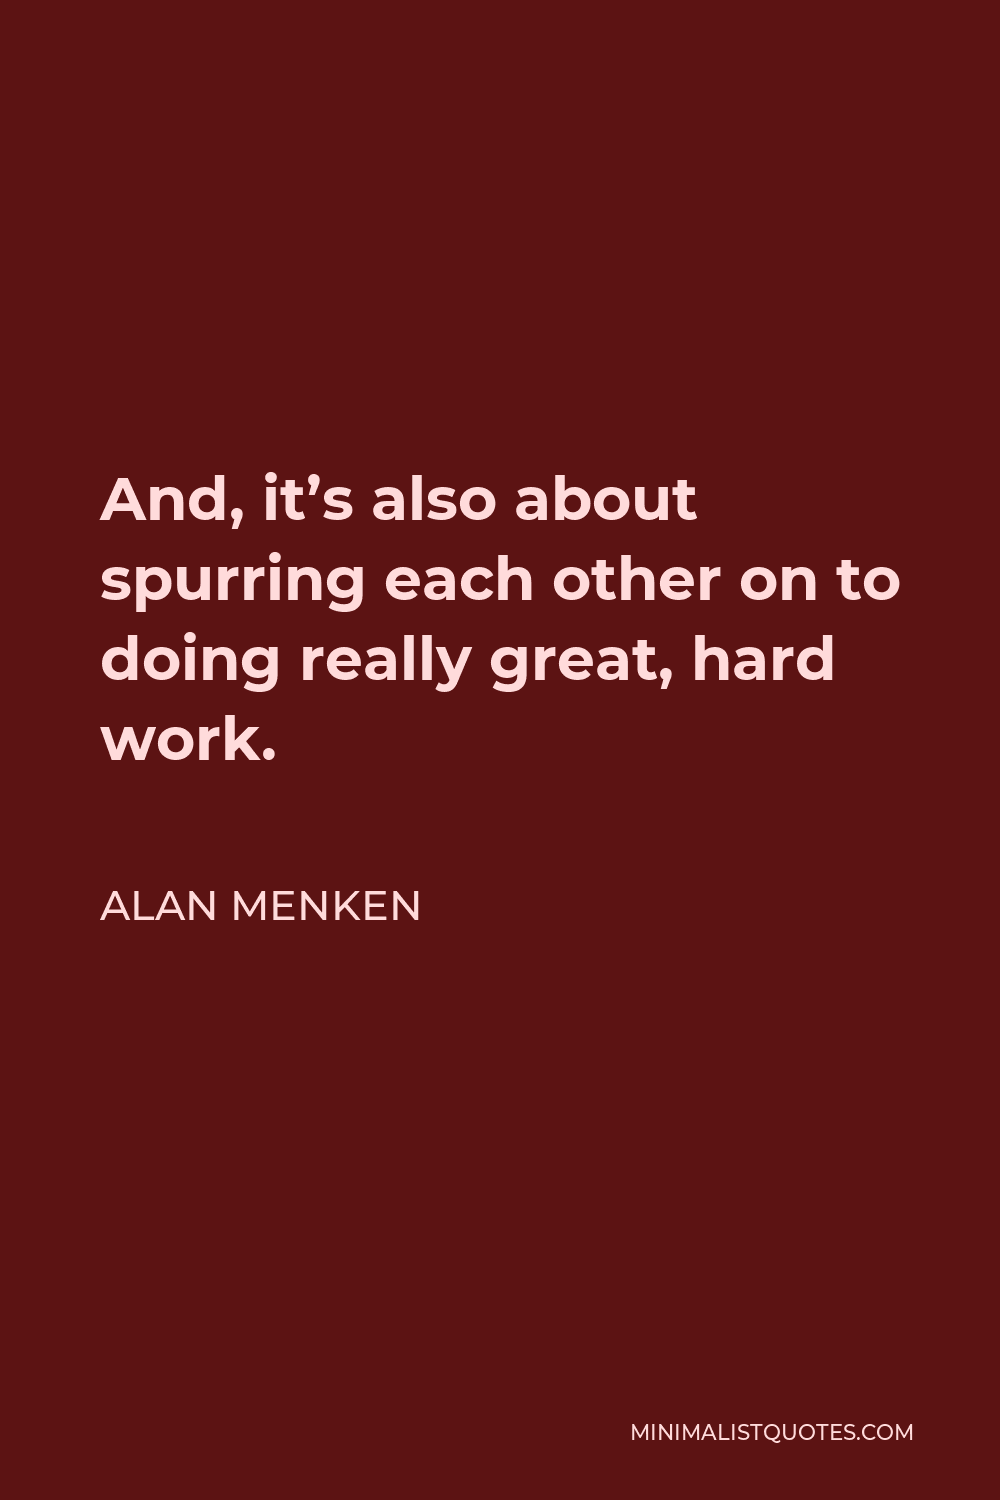 Alan Menken Quote - And, it’s also about spurring each other on to doing really great, hard work.